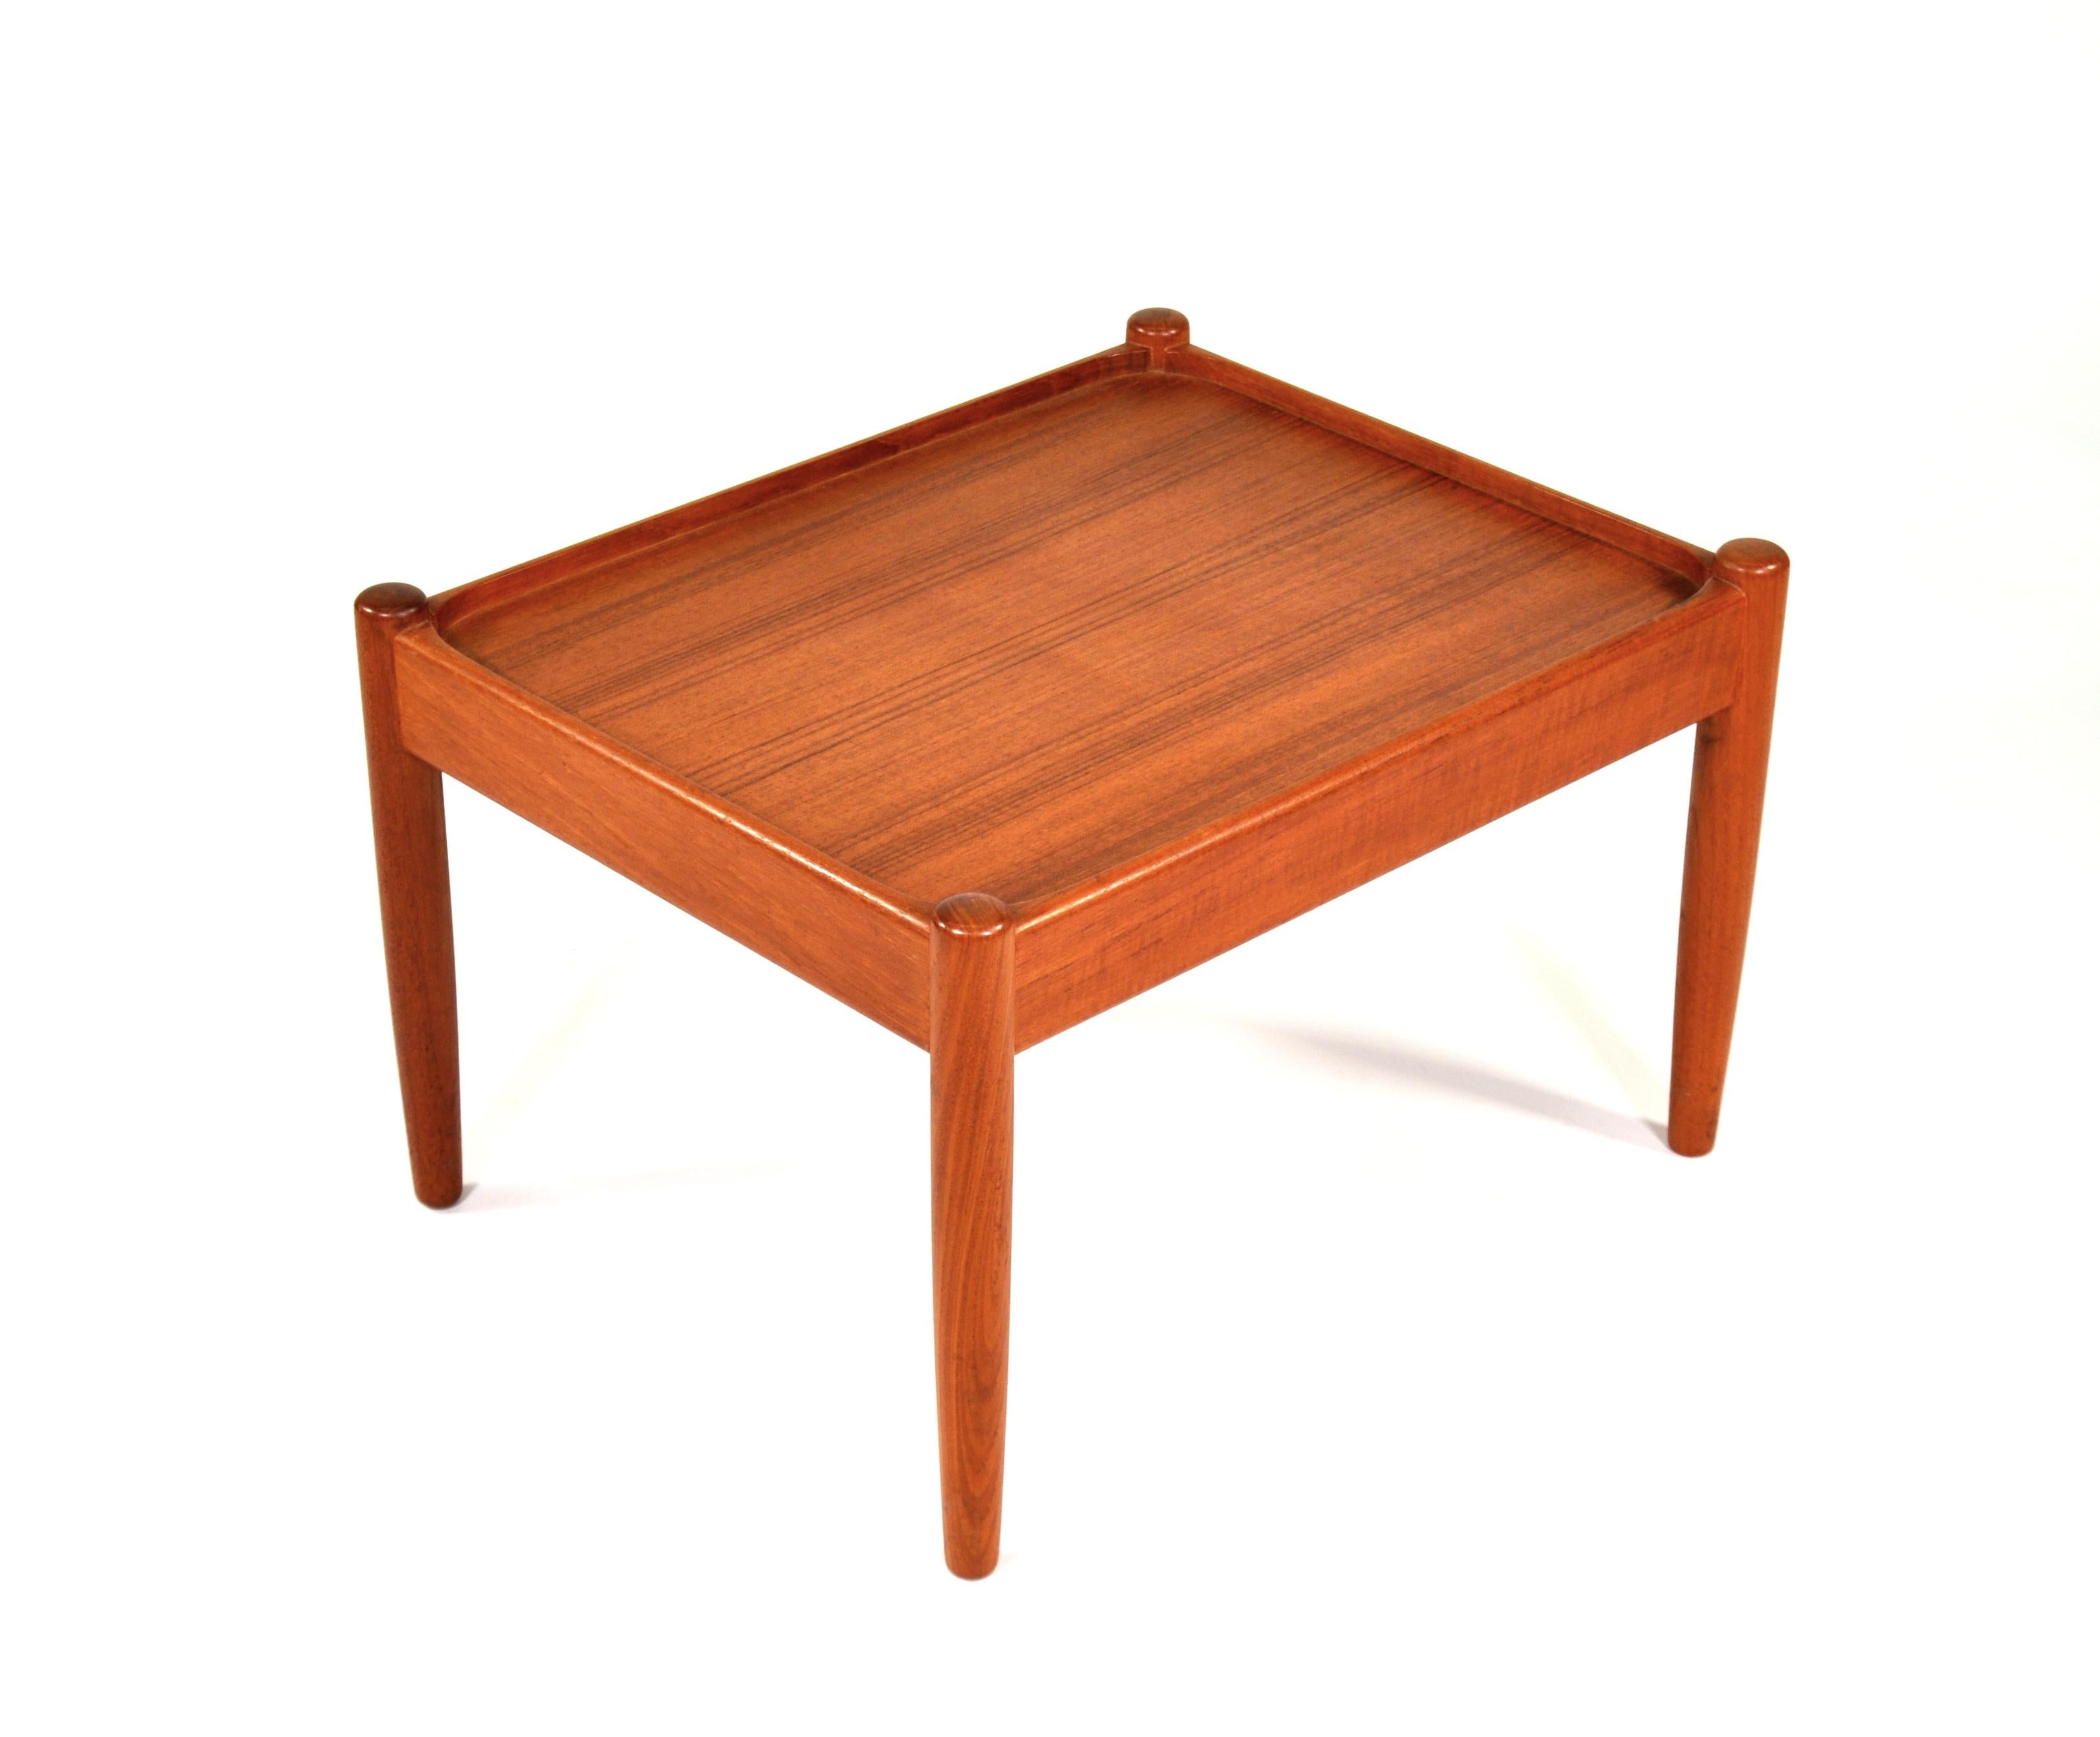 A vintage Danish mid-century teak end table by Poul Dinesen, dating from the 1960s. The occasional table has simple, clean lines, typical of Scandinavian Modern designs. Made in Denmark. Bears original label.